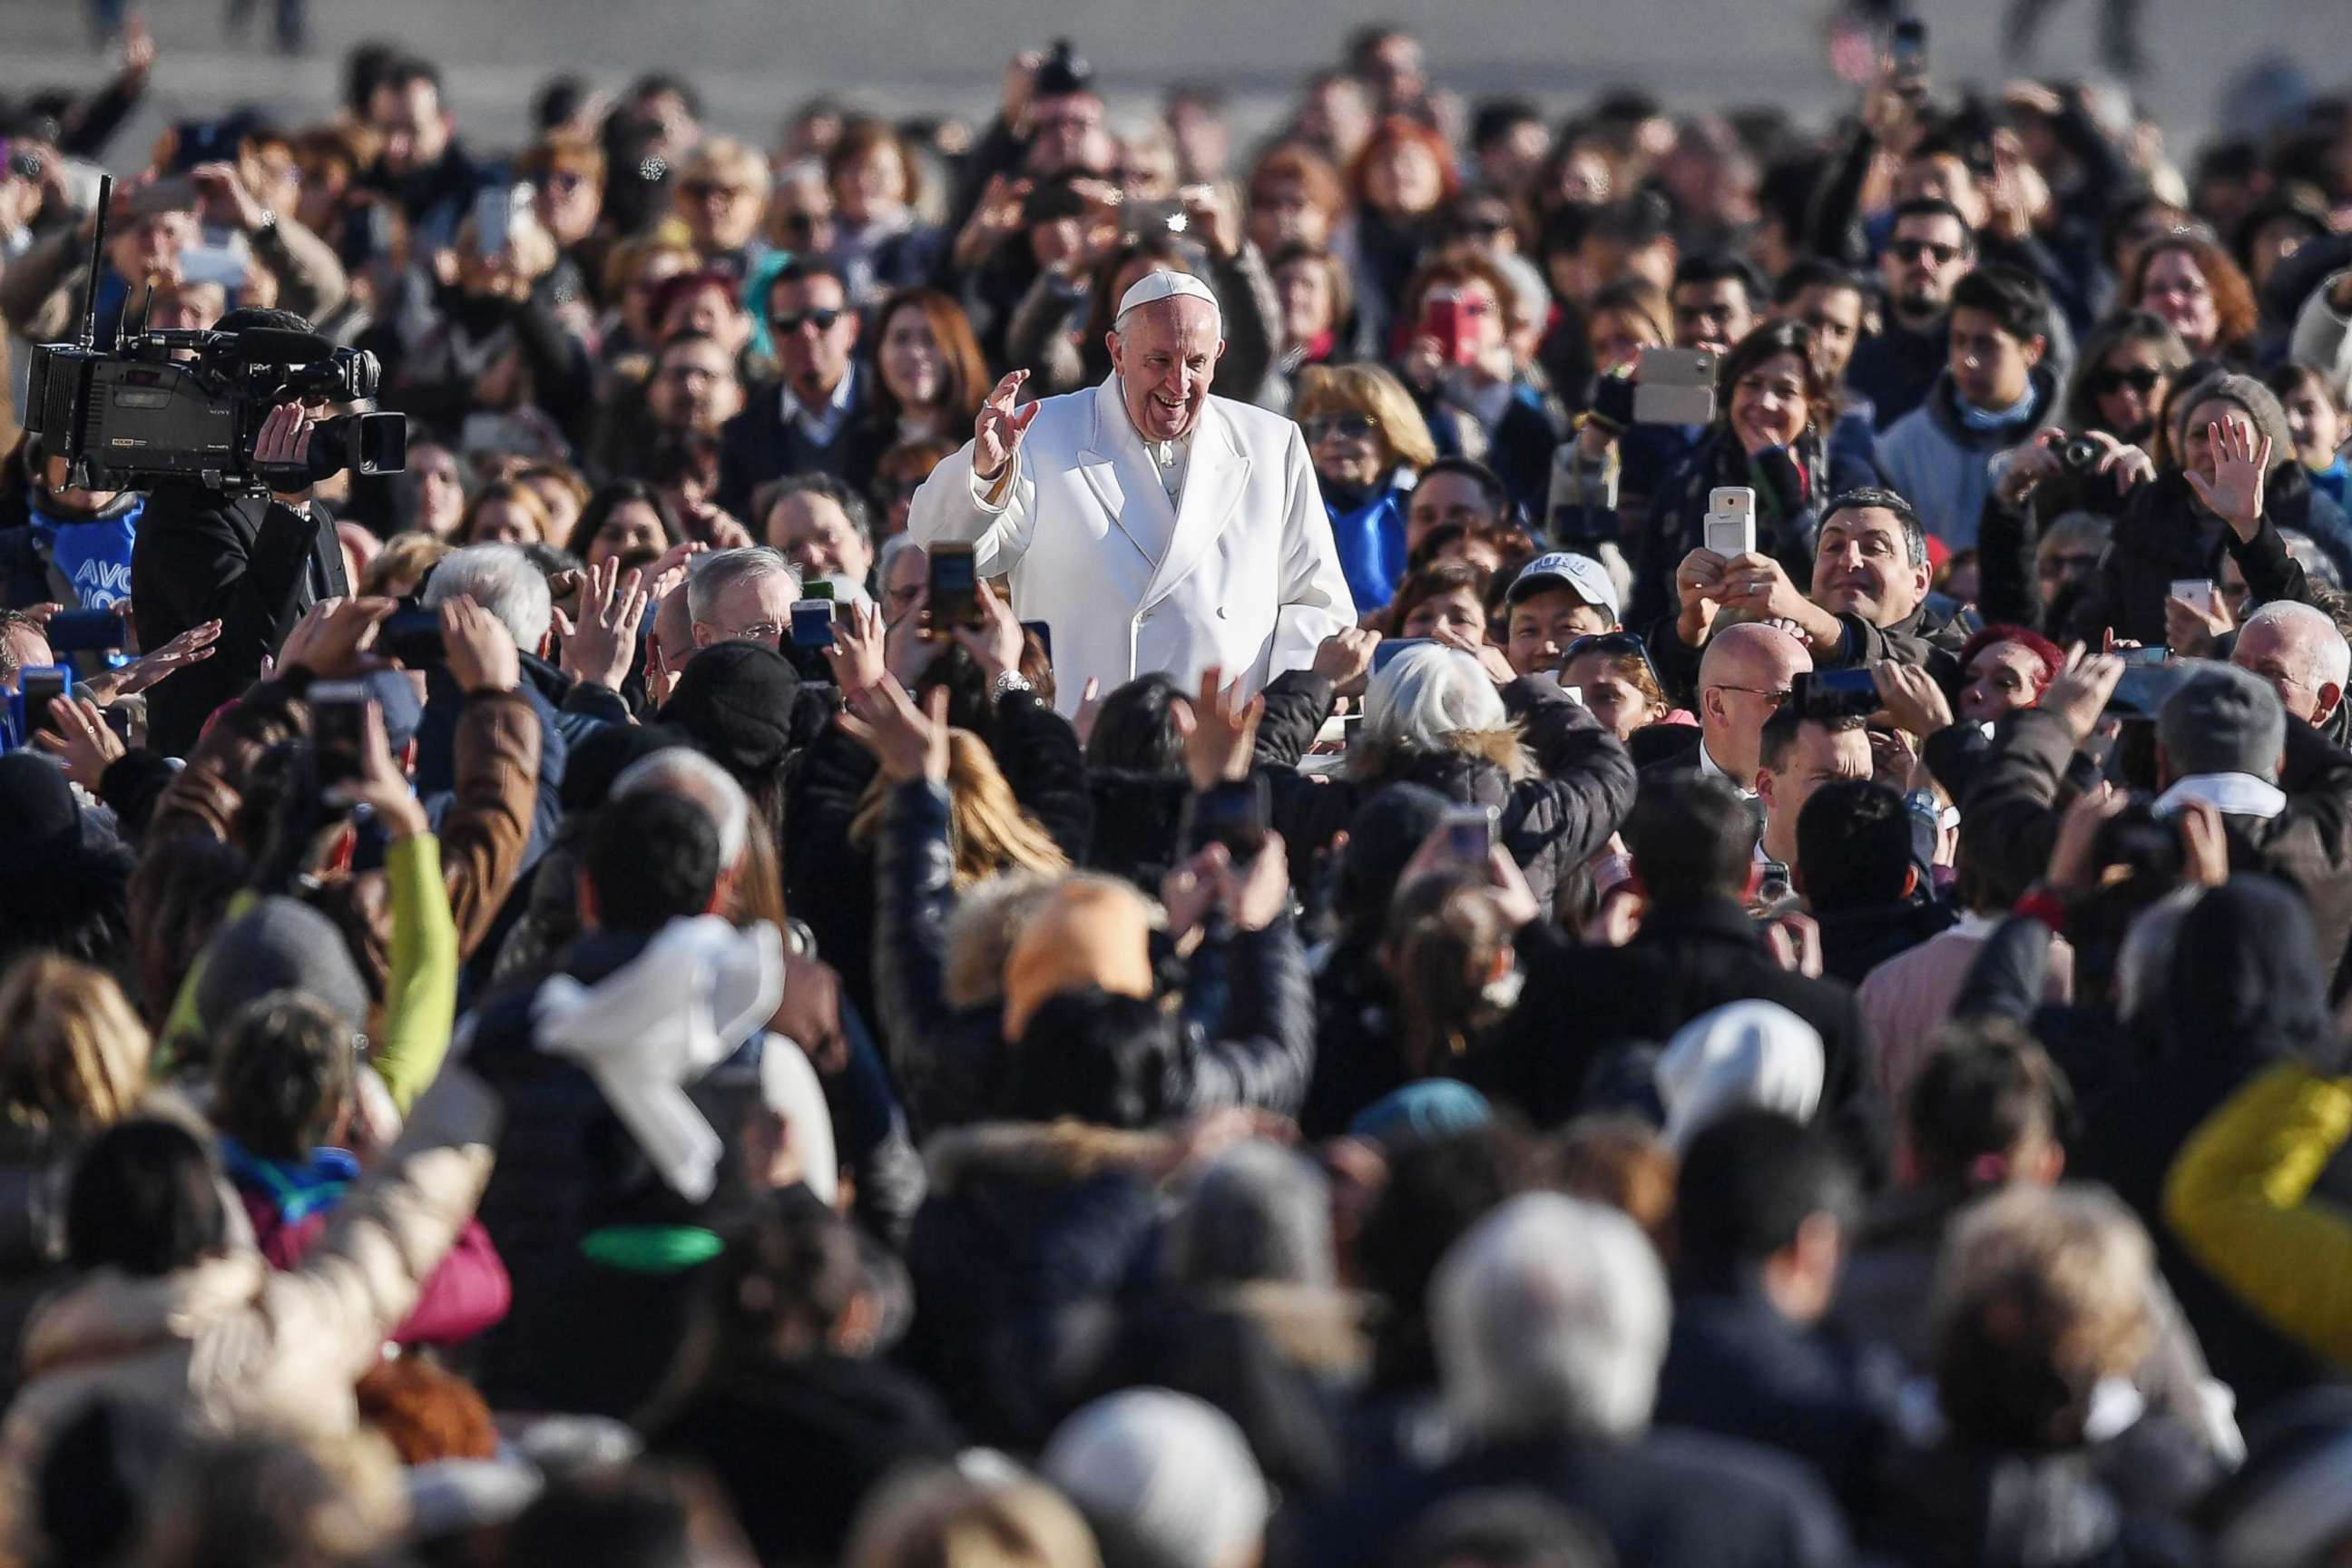 PHOTO: Pope Francis is welcomed by the crowd as he arrives for a general audience in St Peter Square, Vatican City, Jan. 24, 2018.